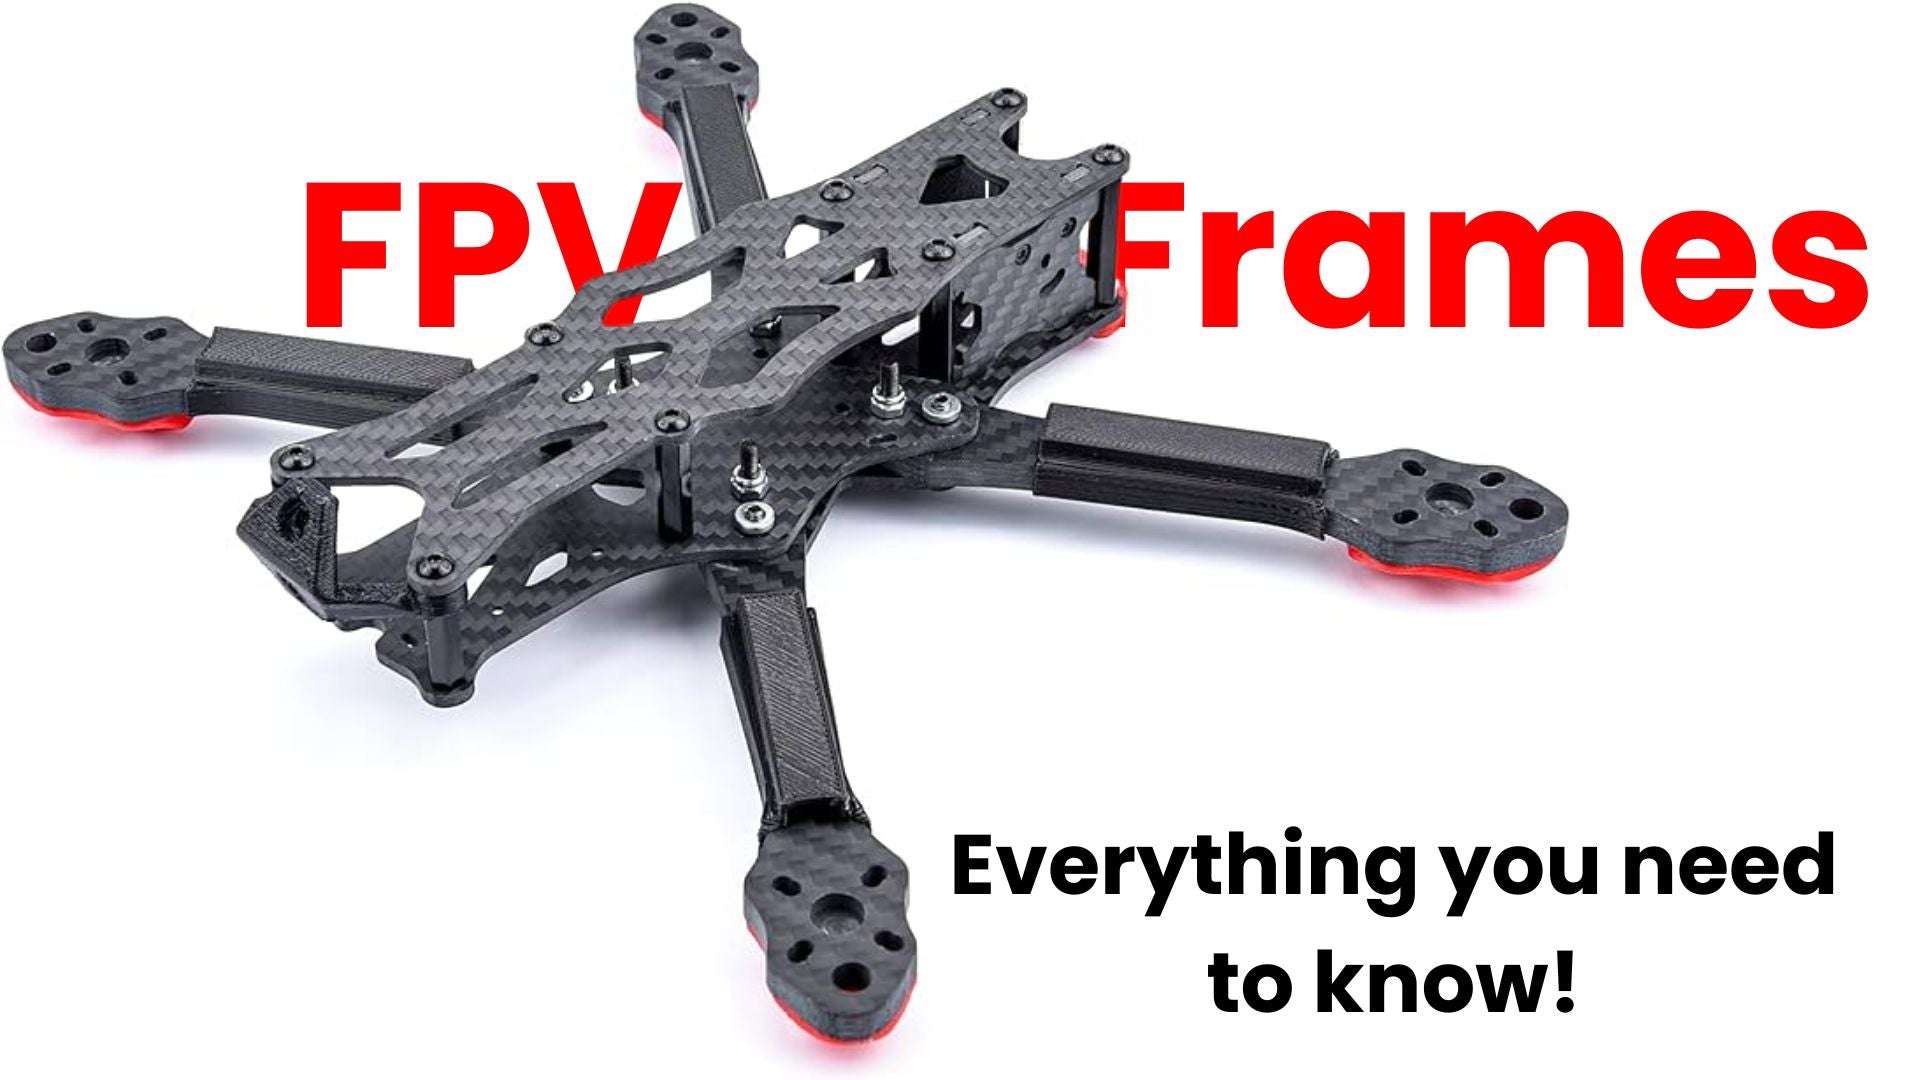 What are FPV Frames?